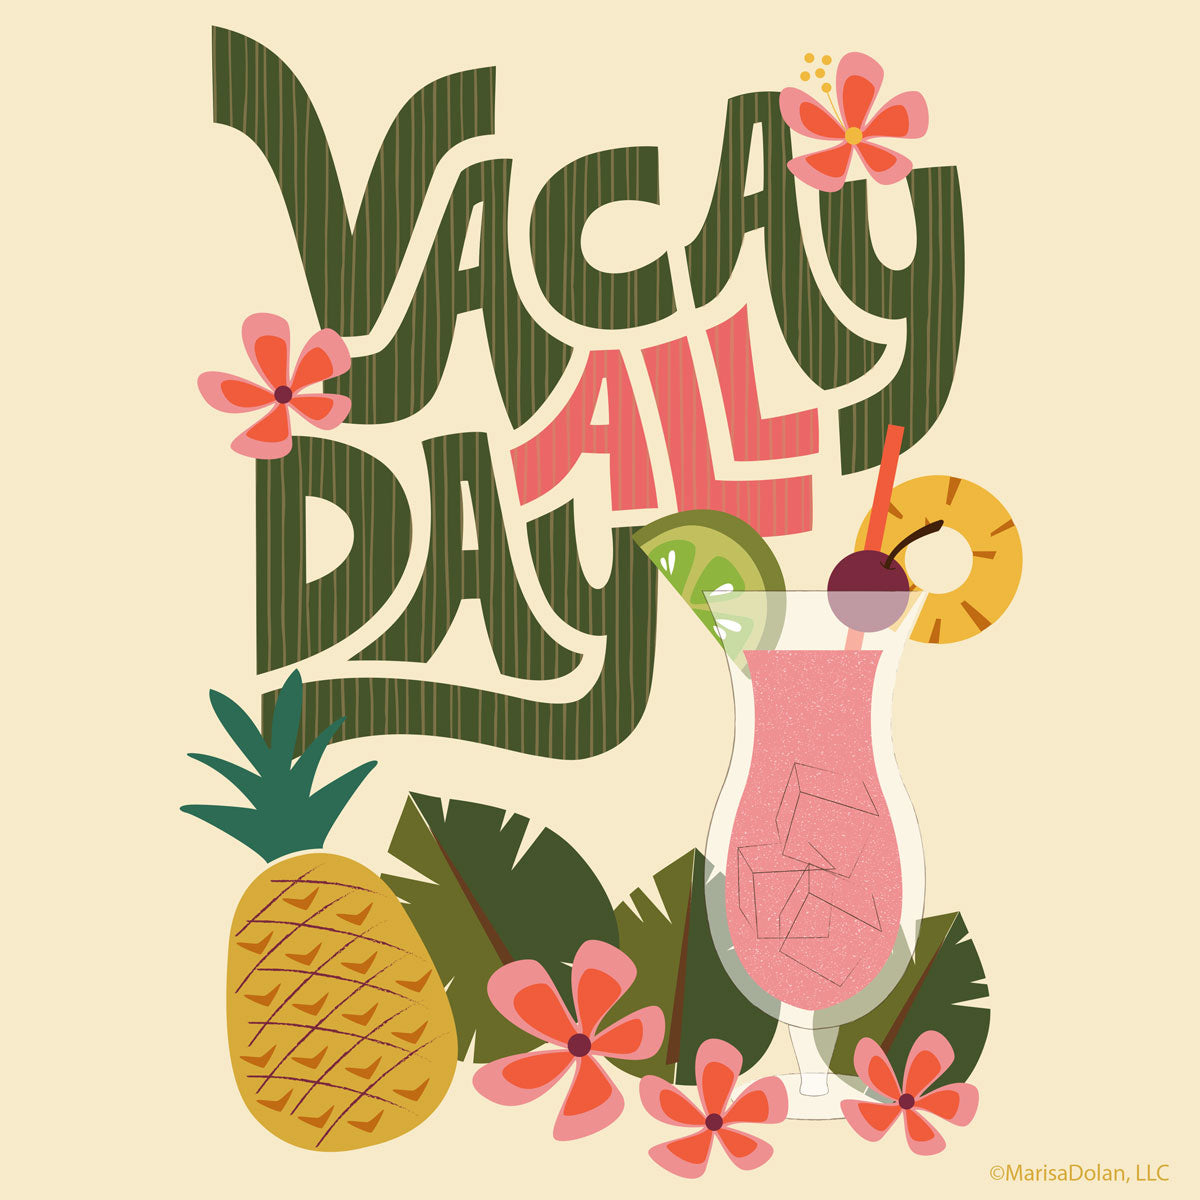 Hand lettering illustration featuring tropical design with saying "Vacay all day" by Marisa Dolan, Gigglemugg.